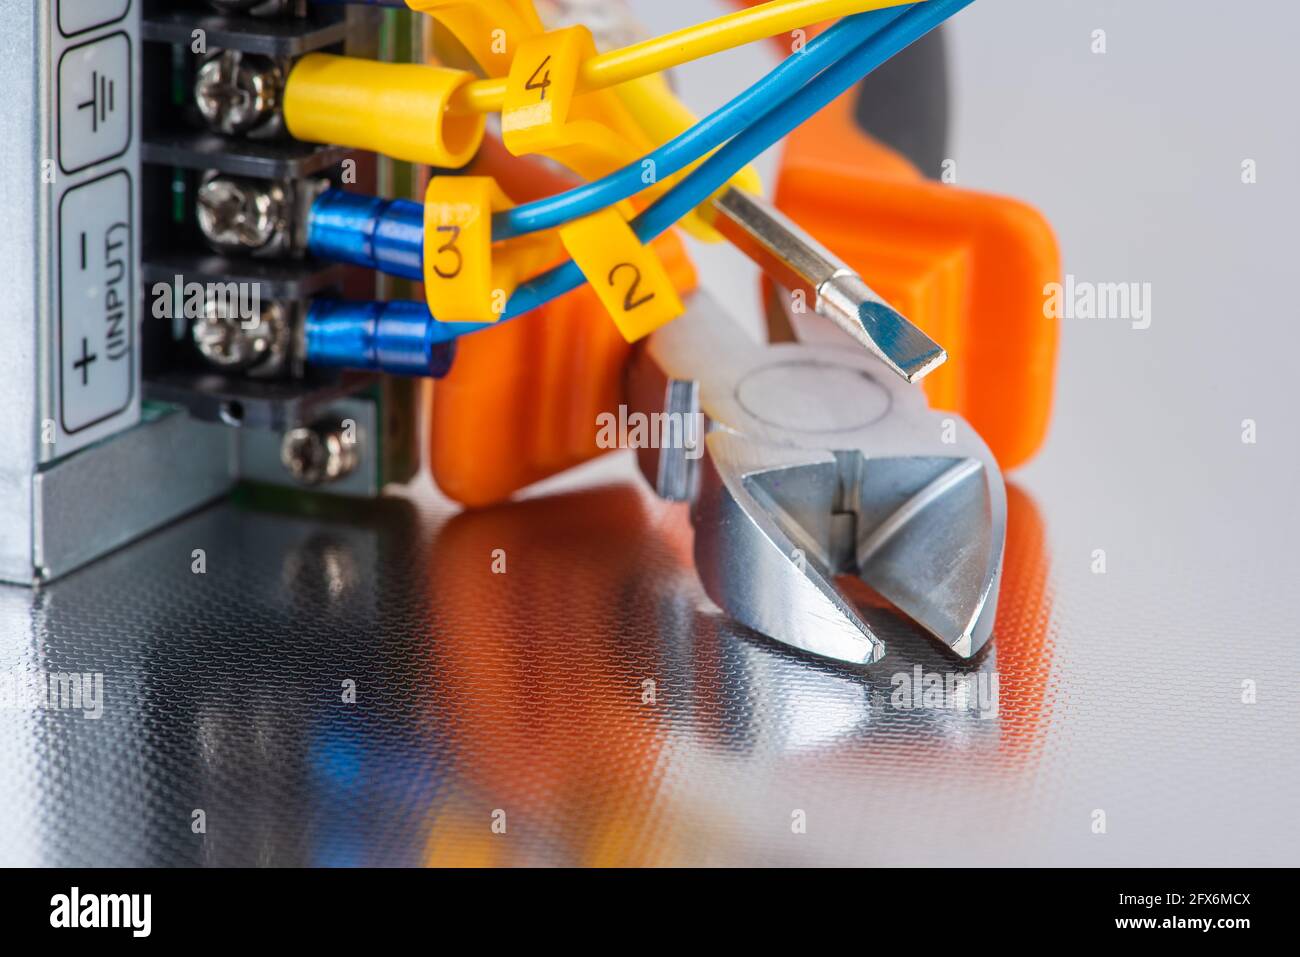 Electrical hand tool with installation cable wire close-up, service and repairing concept Stock Photo